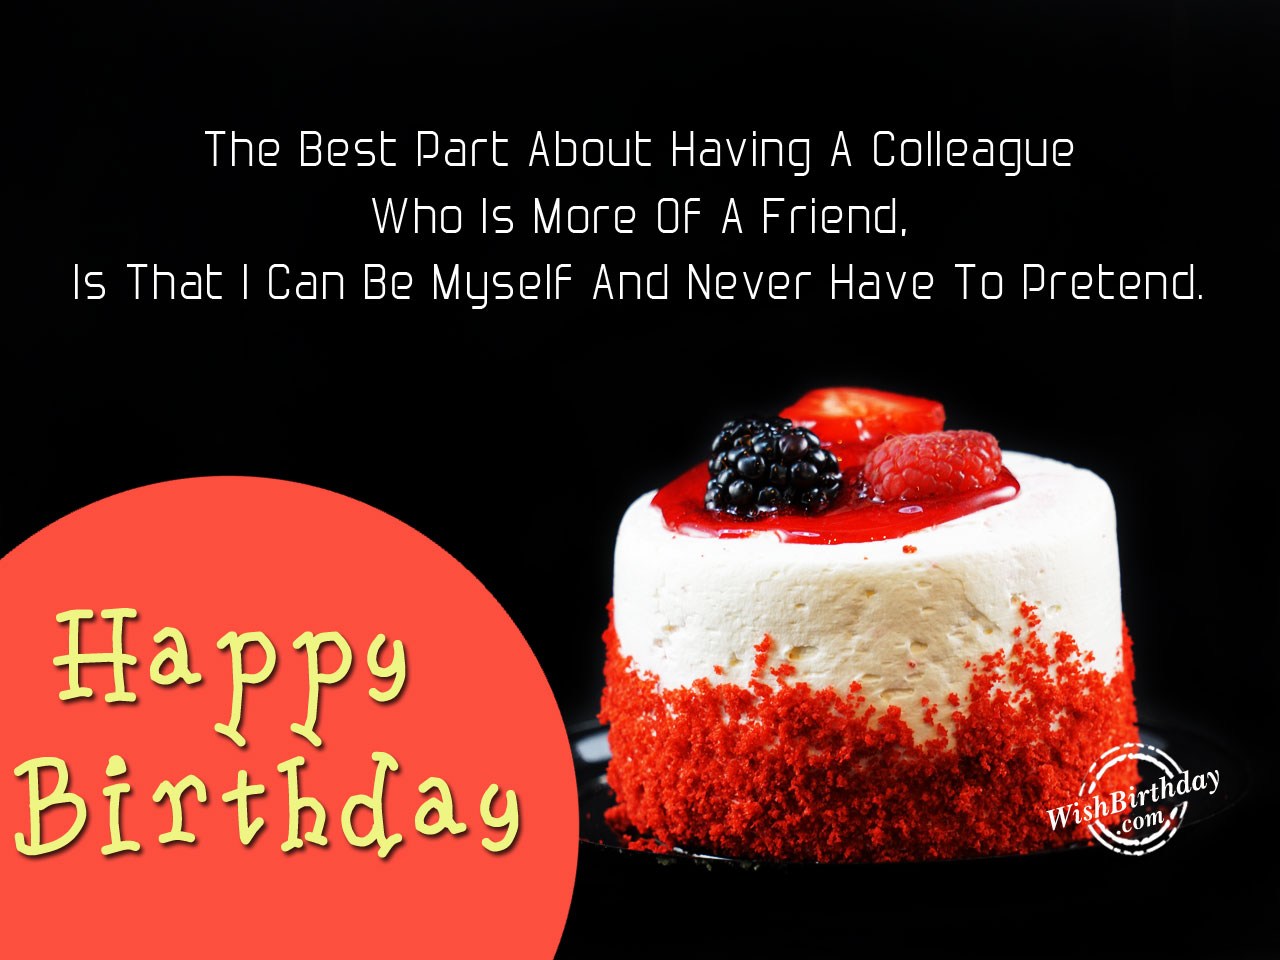 BirtHDay Wishes For Colleague Image Pictures